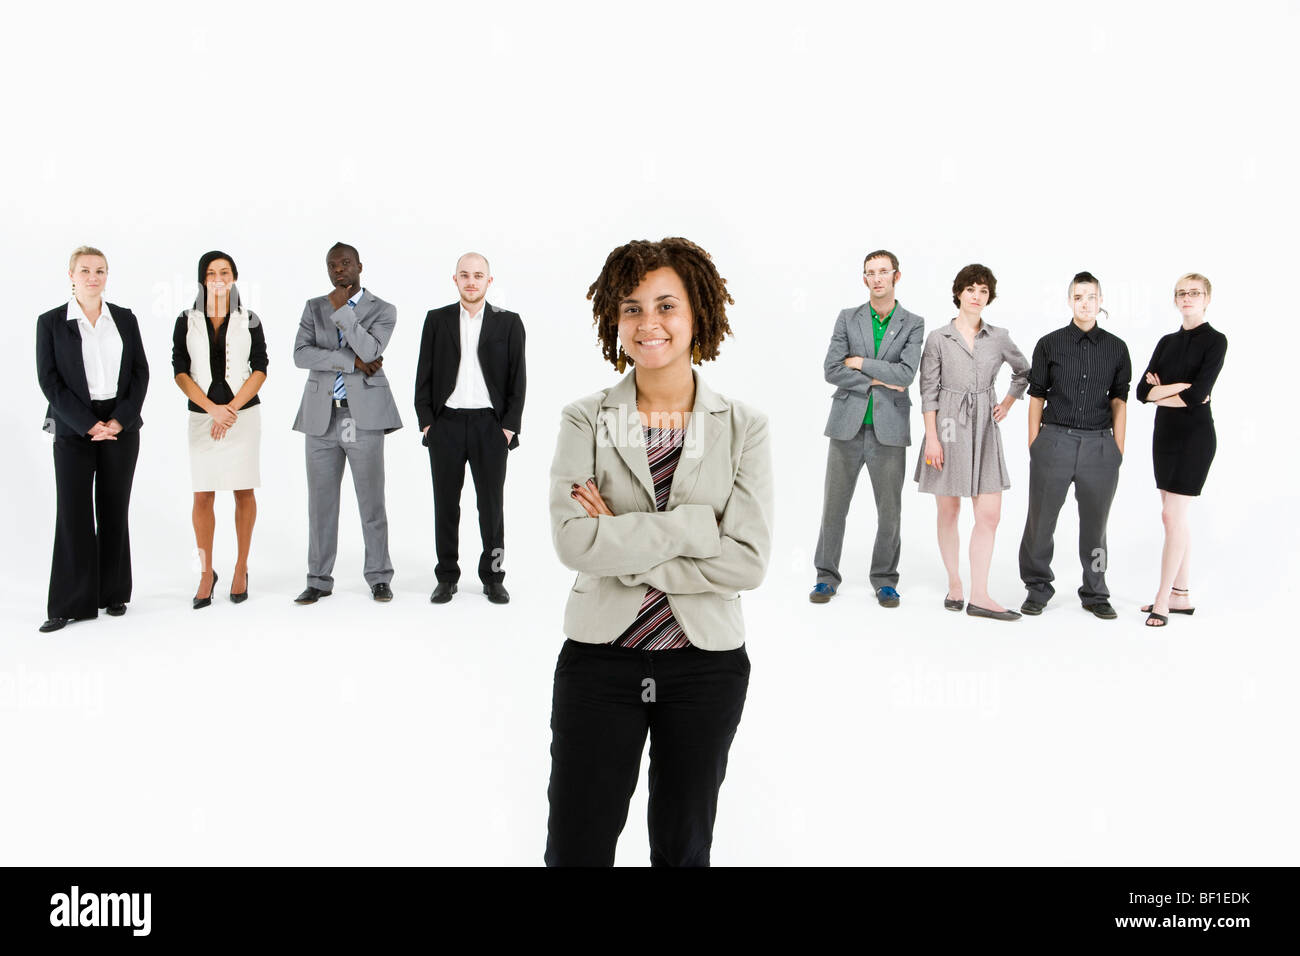 A young professional standing in front of a row of business people Stock Photo